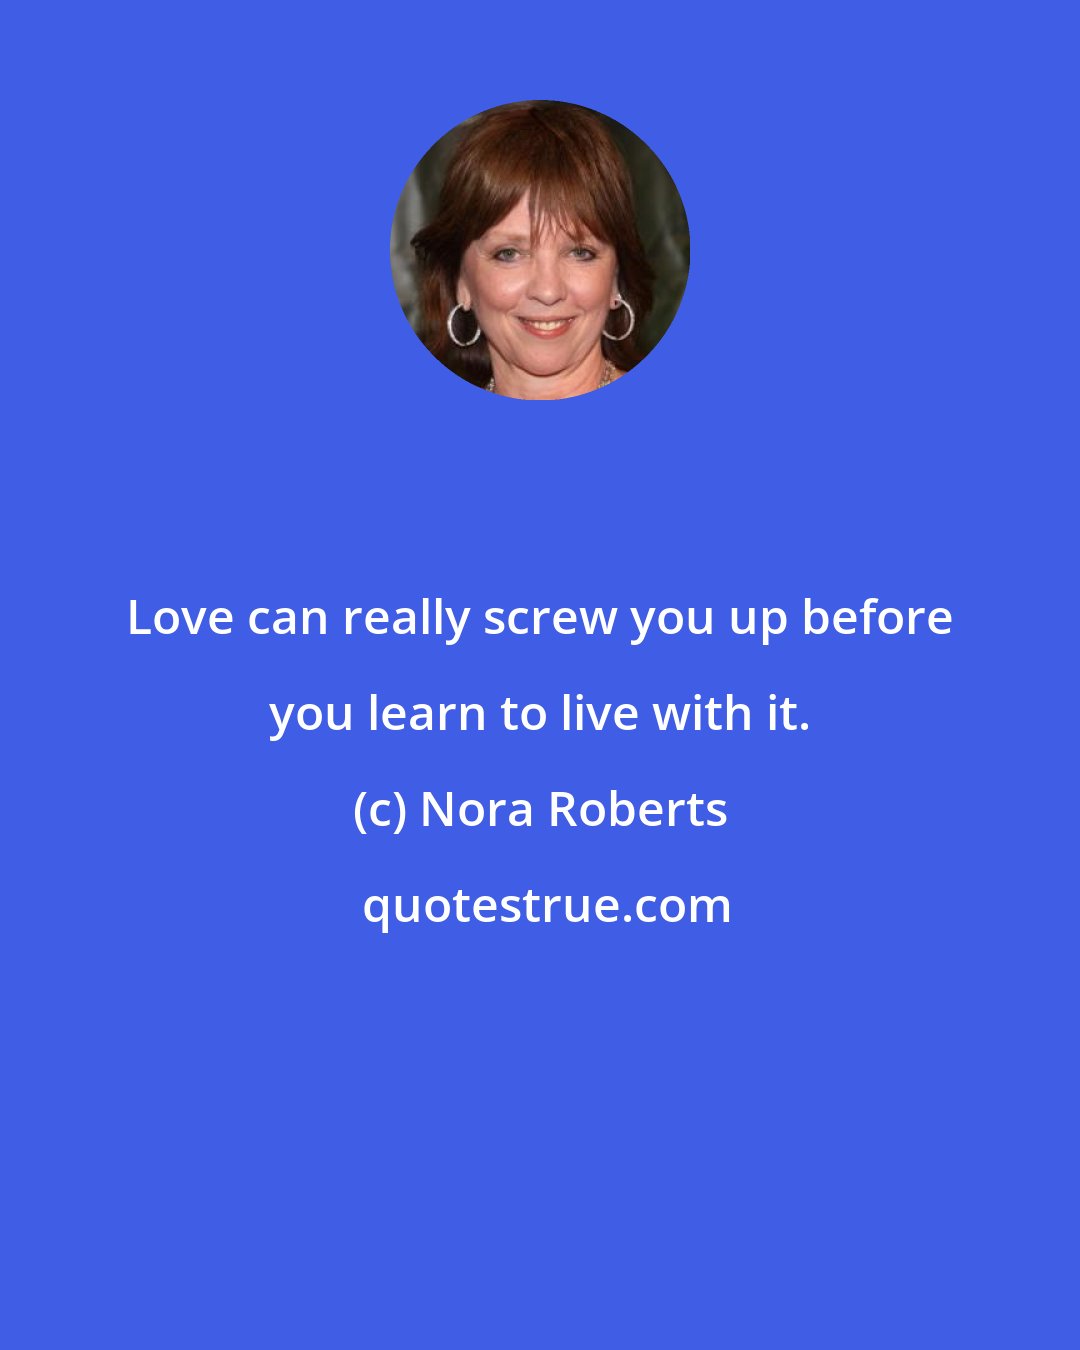 Nora Roberts: Love can really screw you up before you learn to live with it.